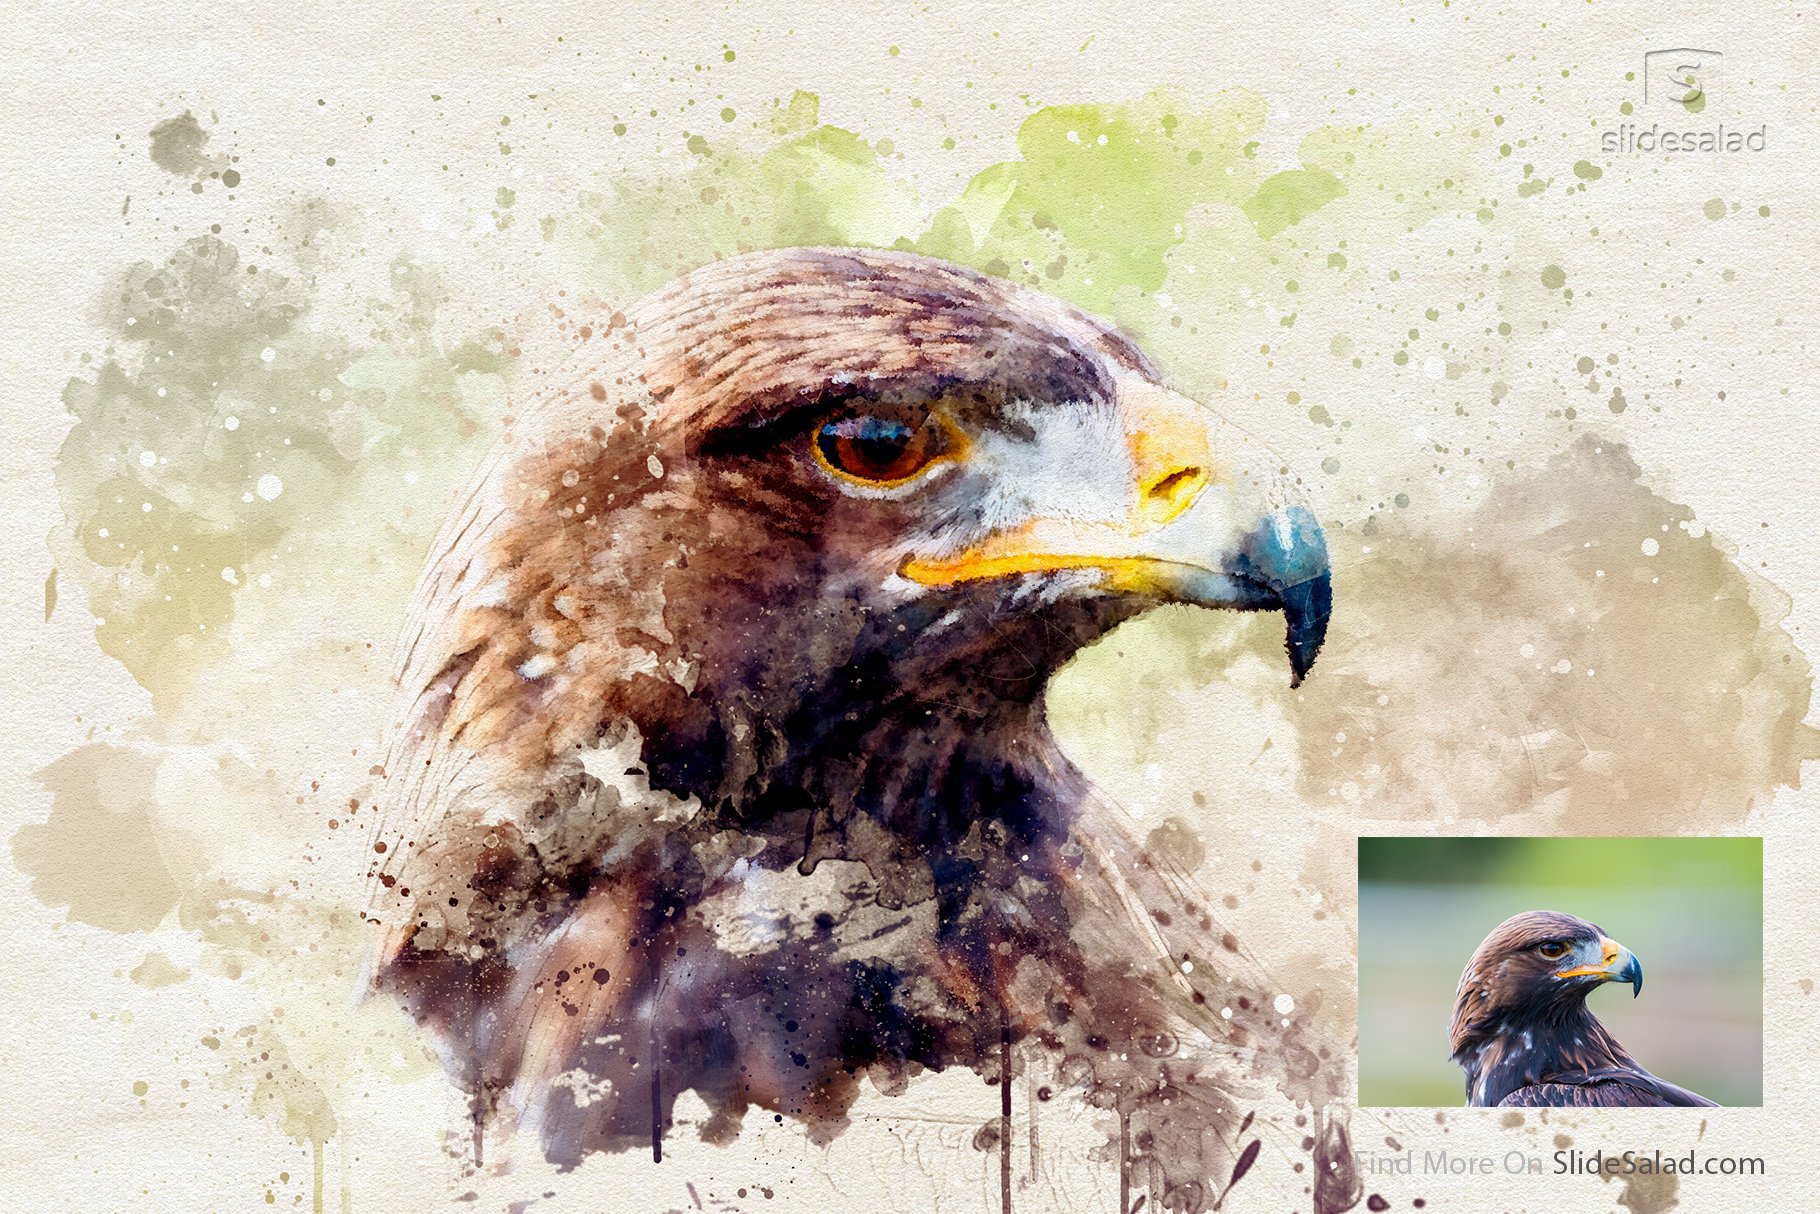 Watercolor Photoshop Mock-ups - example 9 with photo.